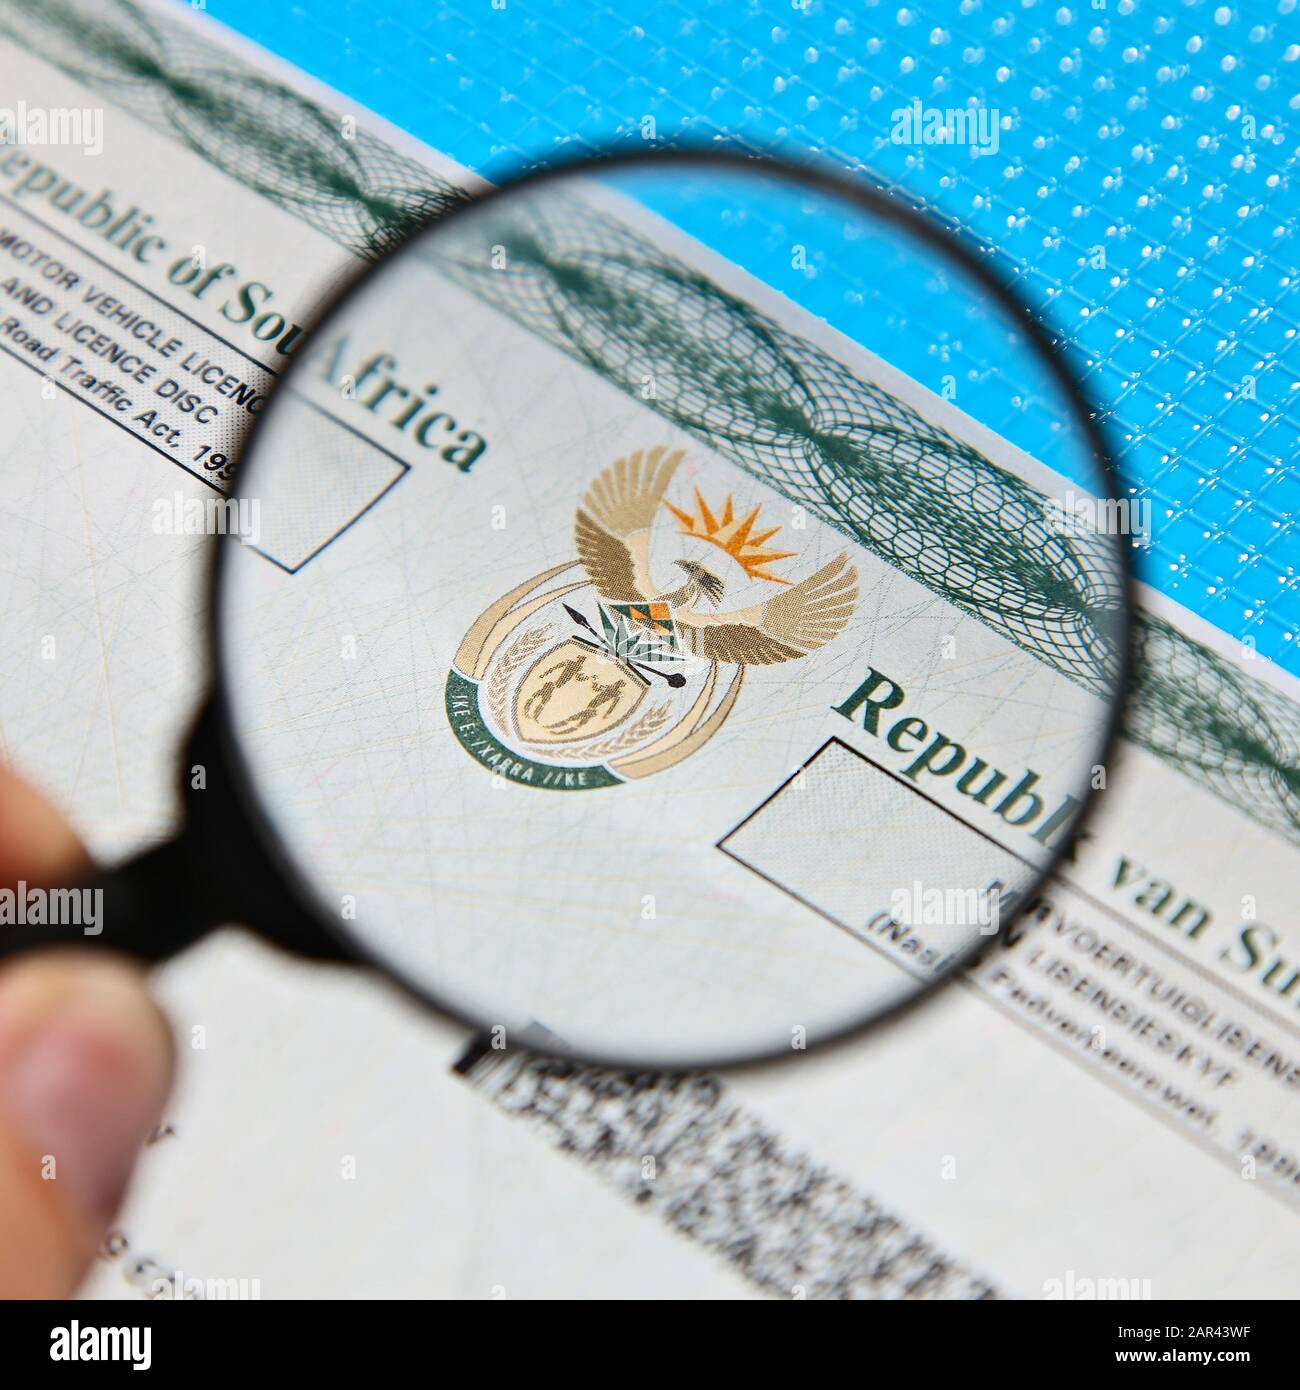 A South African motor vehicle car licence document Stock Photo